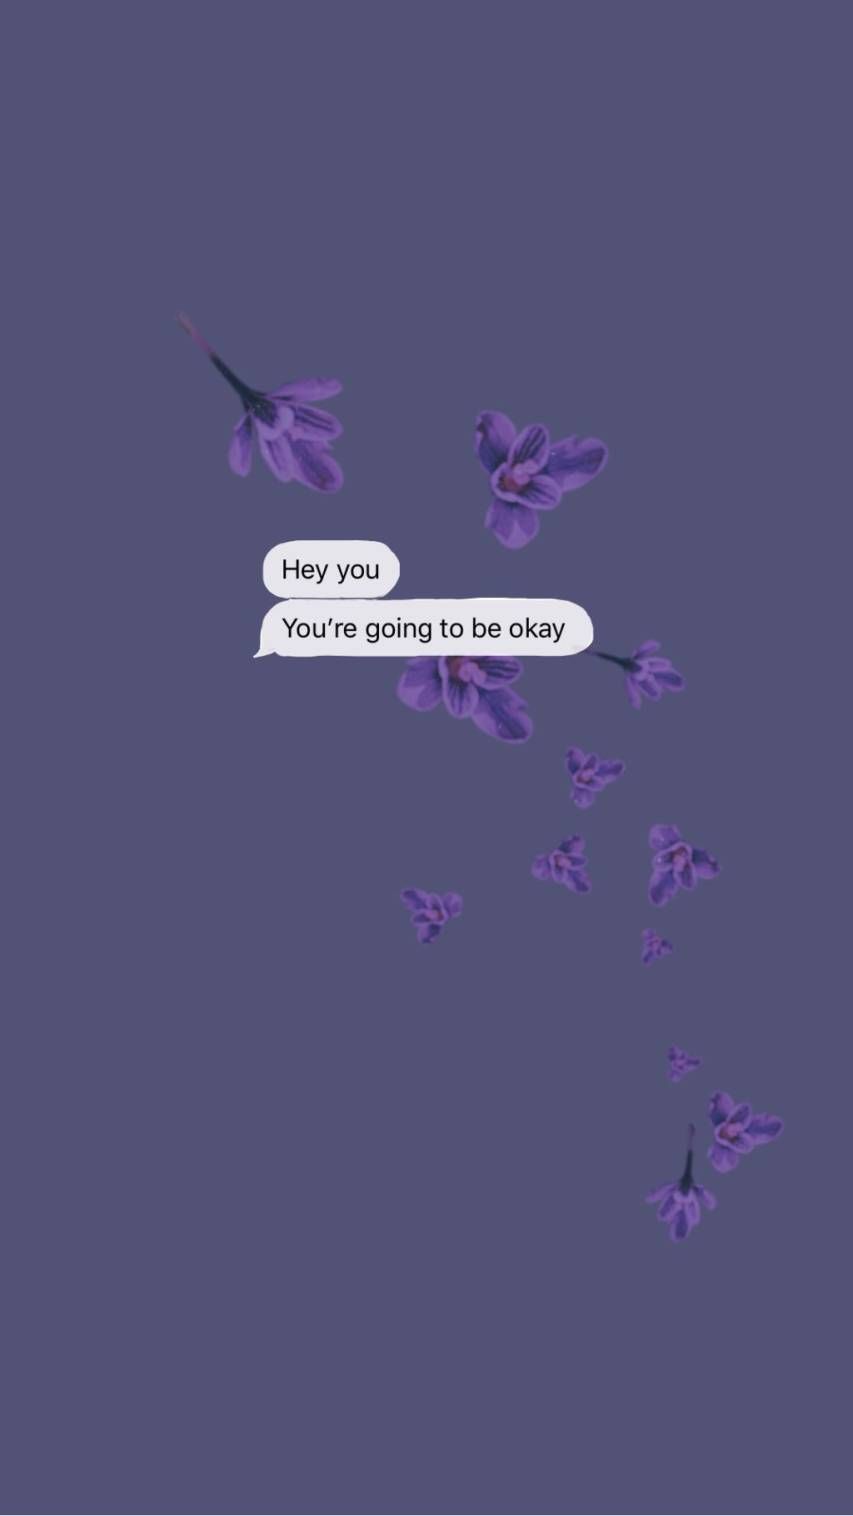 Hey you, you're going to be okay - Cute